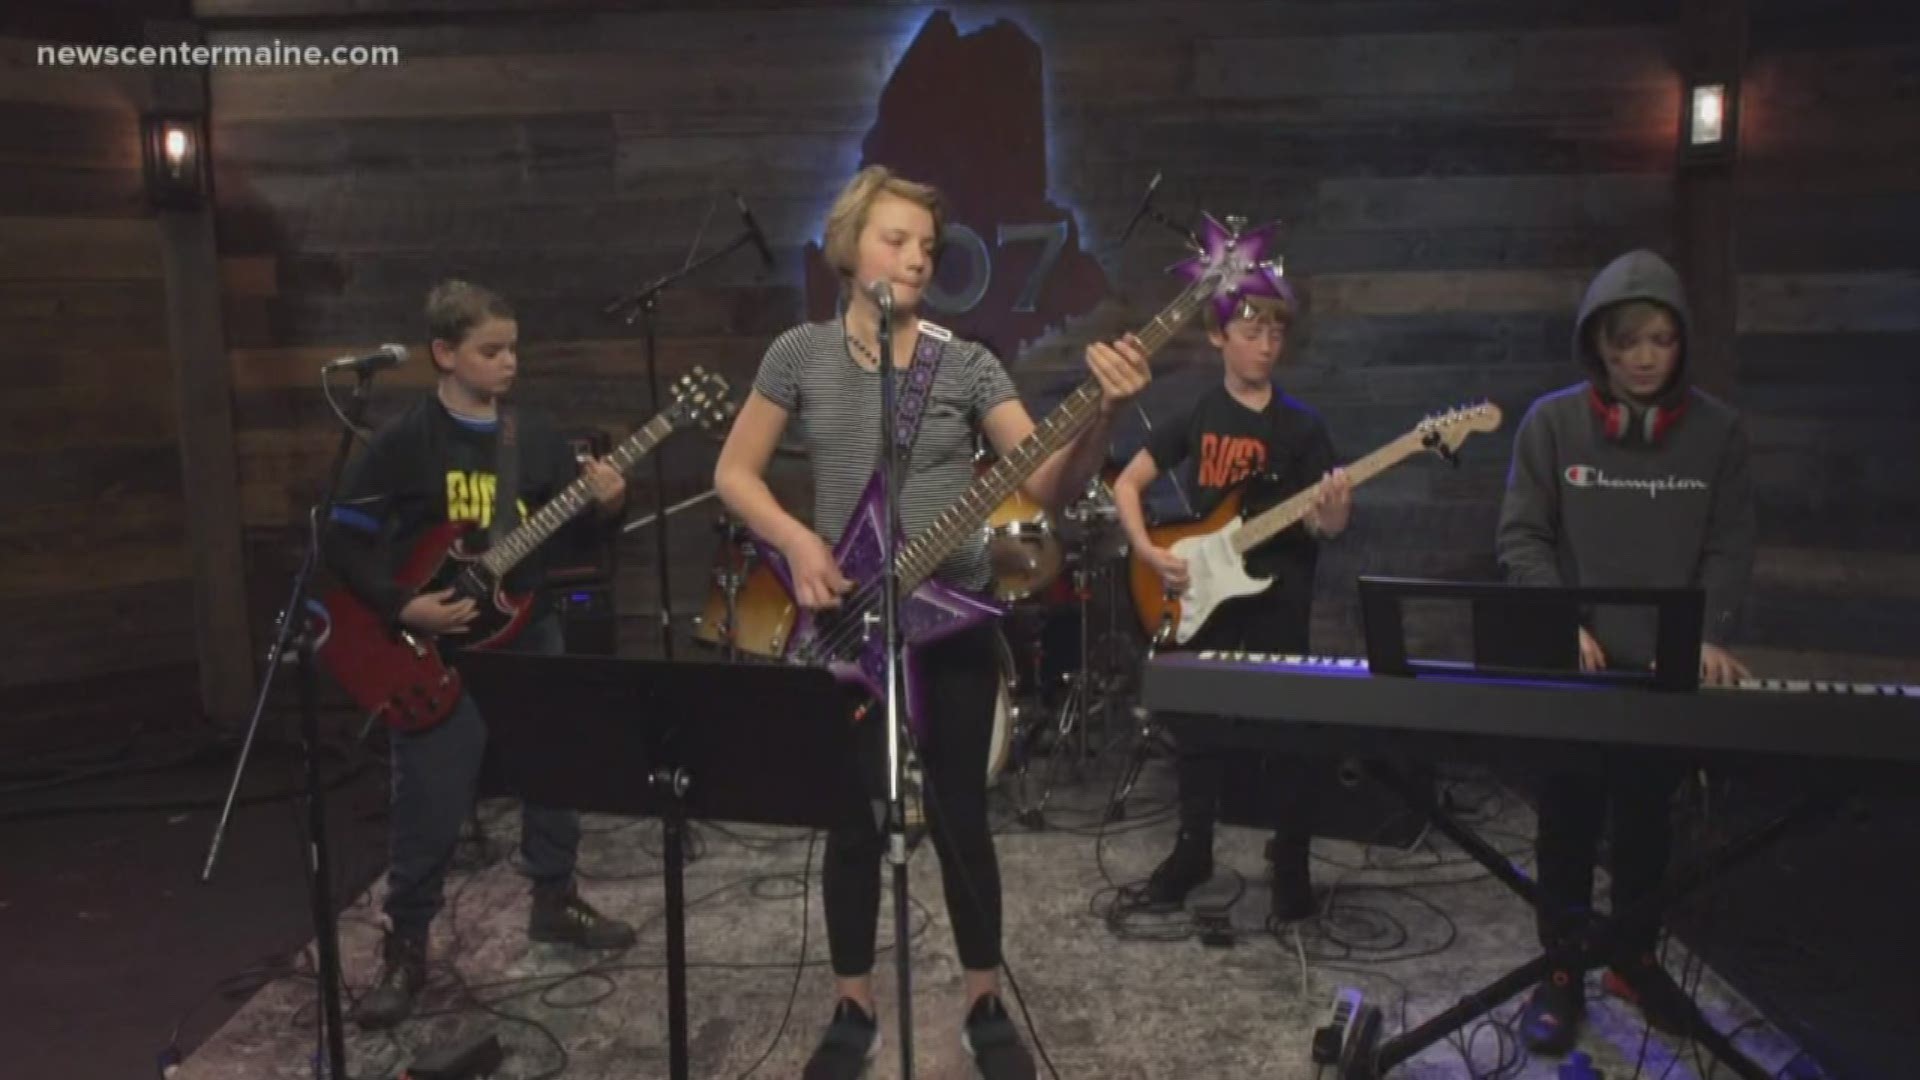 MAMM hosts "Chords For Kids" to raise money to teach students how to rock.